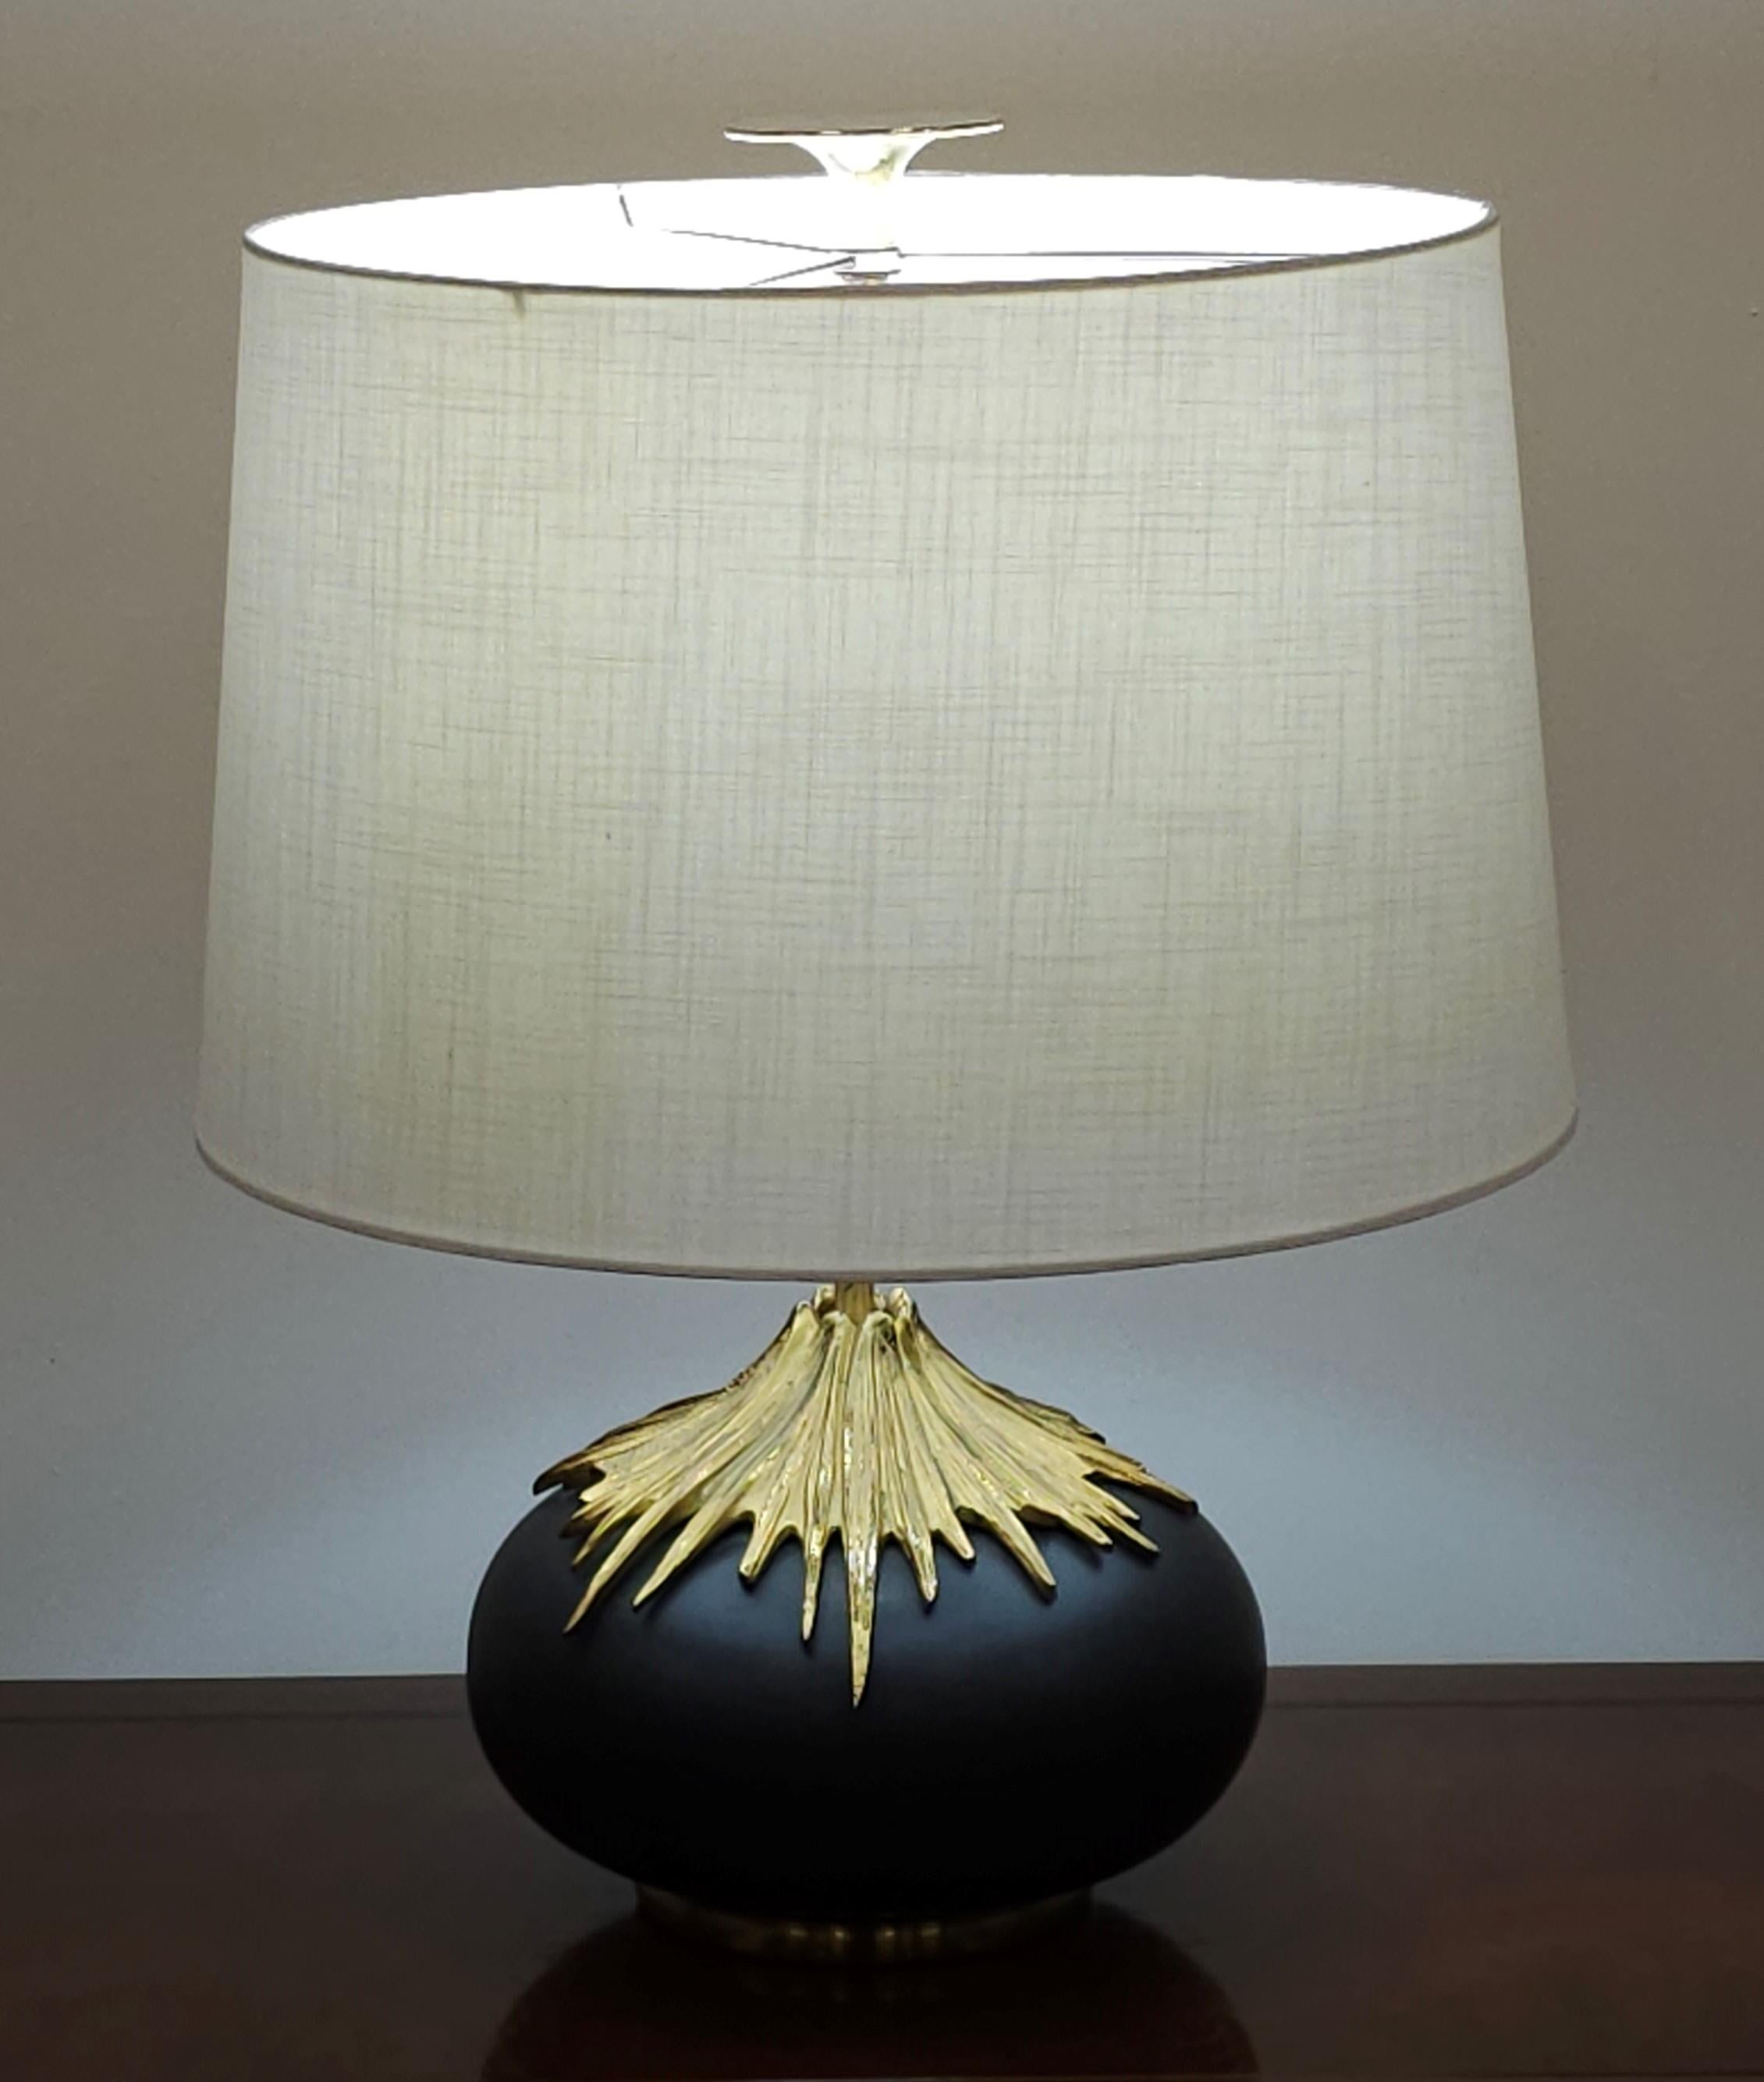 A chic bronze and brass table lamp by Maison Charles stamped 